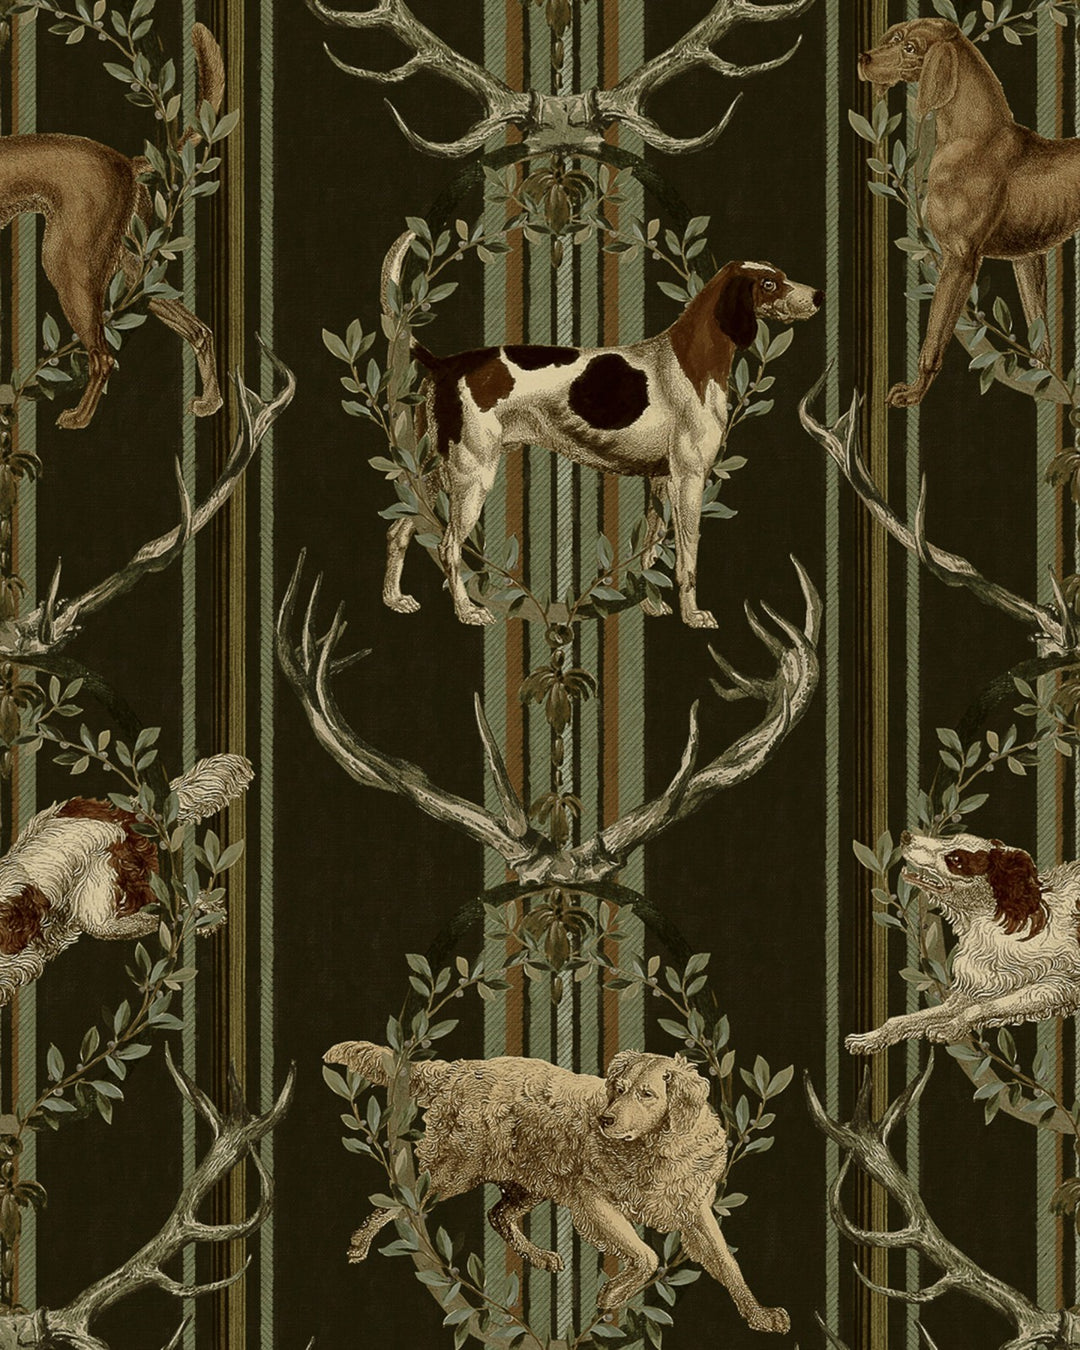 mind-the-gap-tyrol-collection-mountain-dogs-wallpaper-peat-black-dogs-antlers-garlands-stripe-background-alpine-chalet-cabin-woodland-hunting-lodge-den-black-striped-background